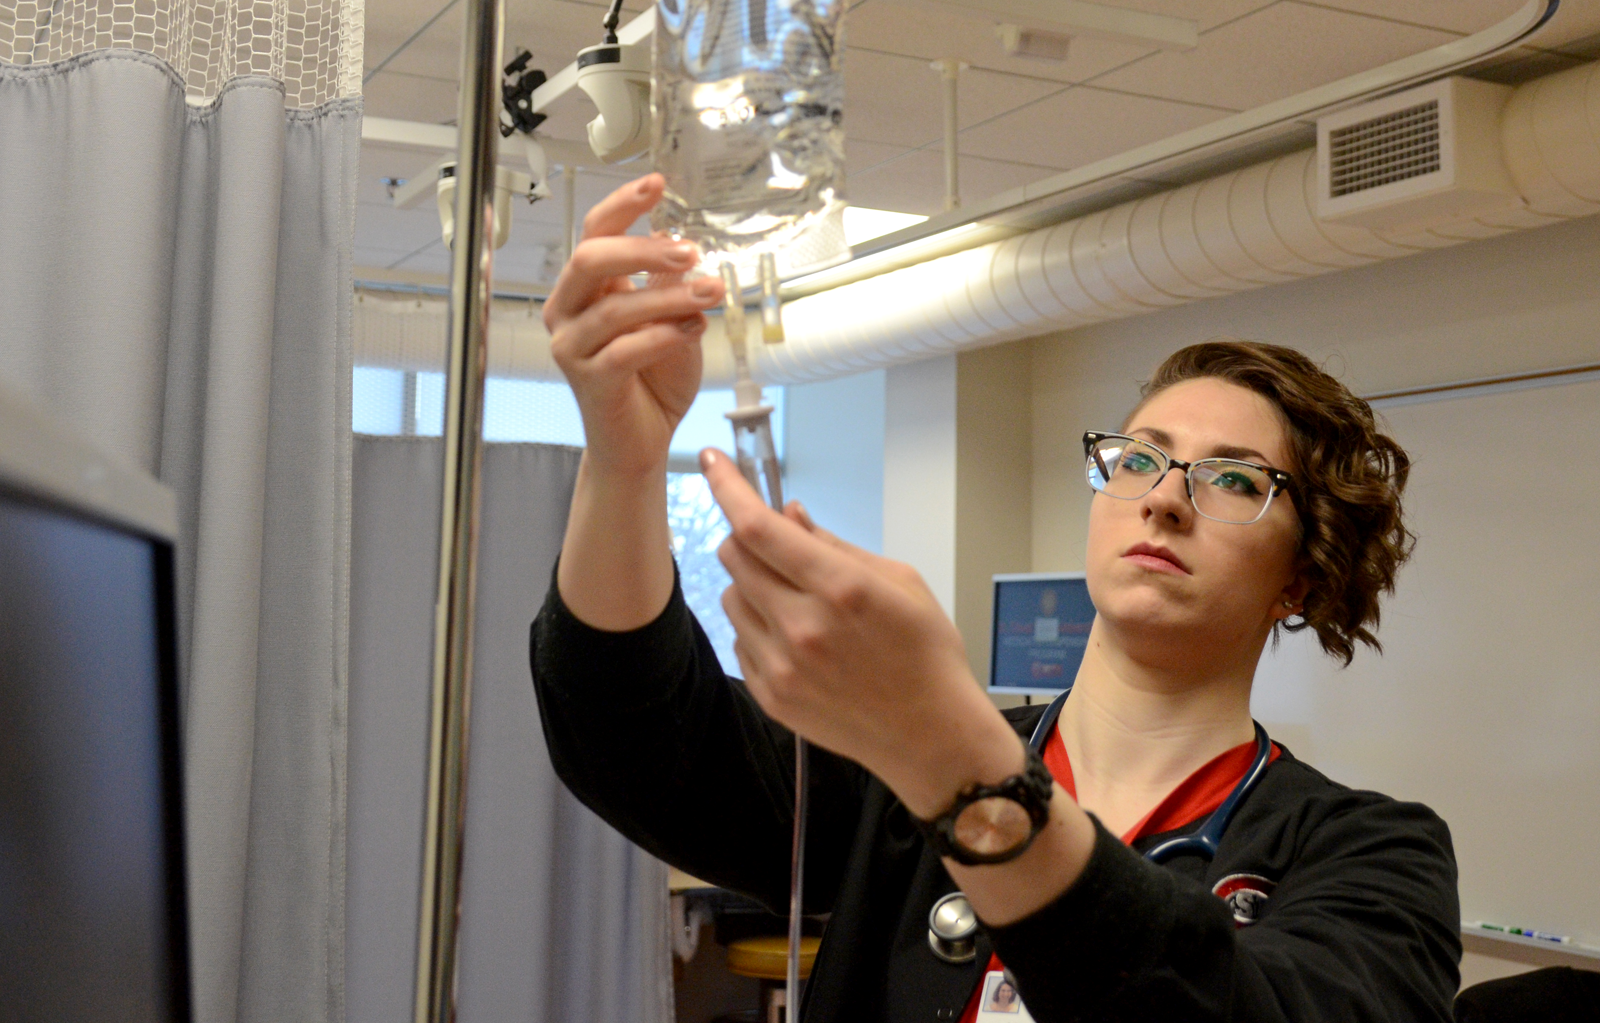 St. Cloud State University Student in the St. Cloud State University Nursing Lab